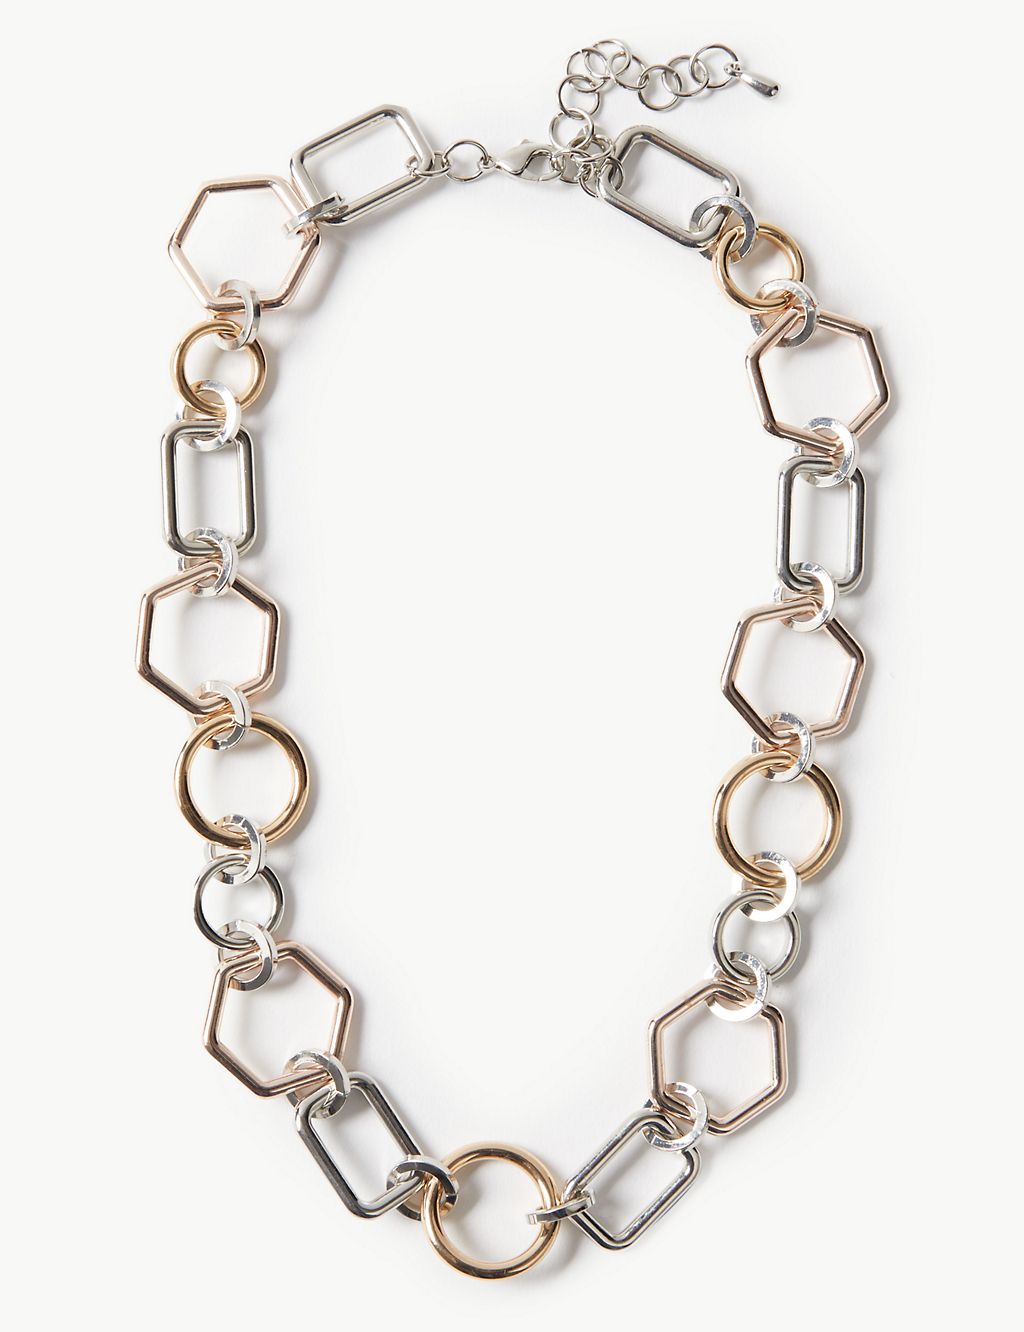 Chain Link Necklace 1 of 1